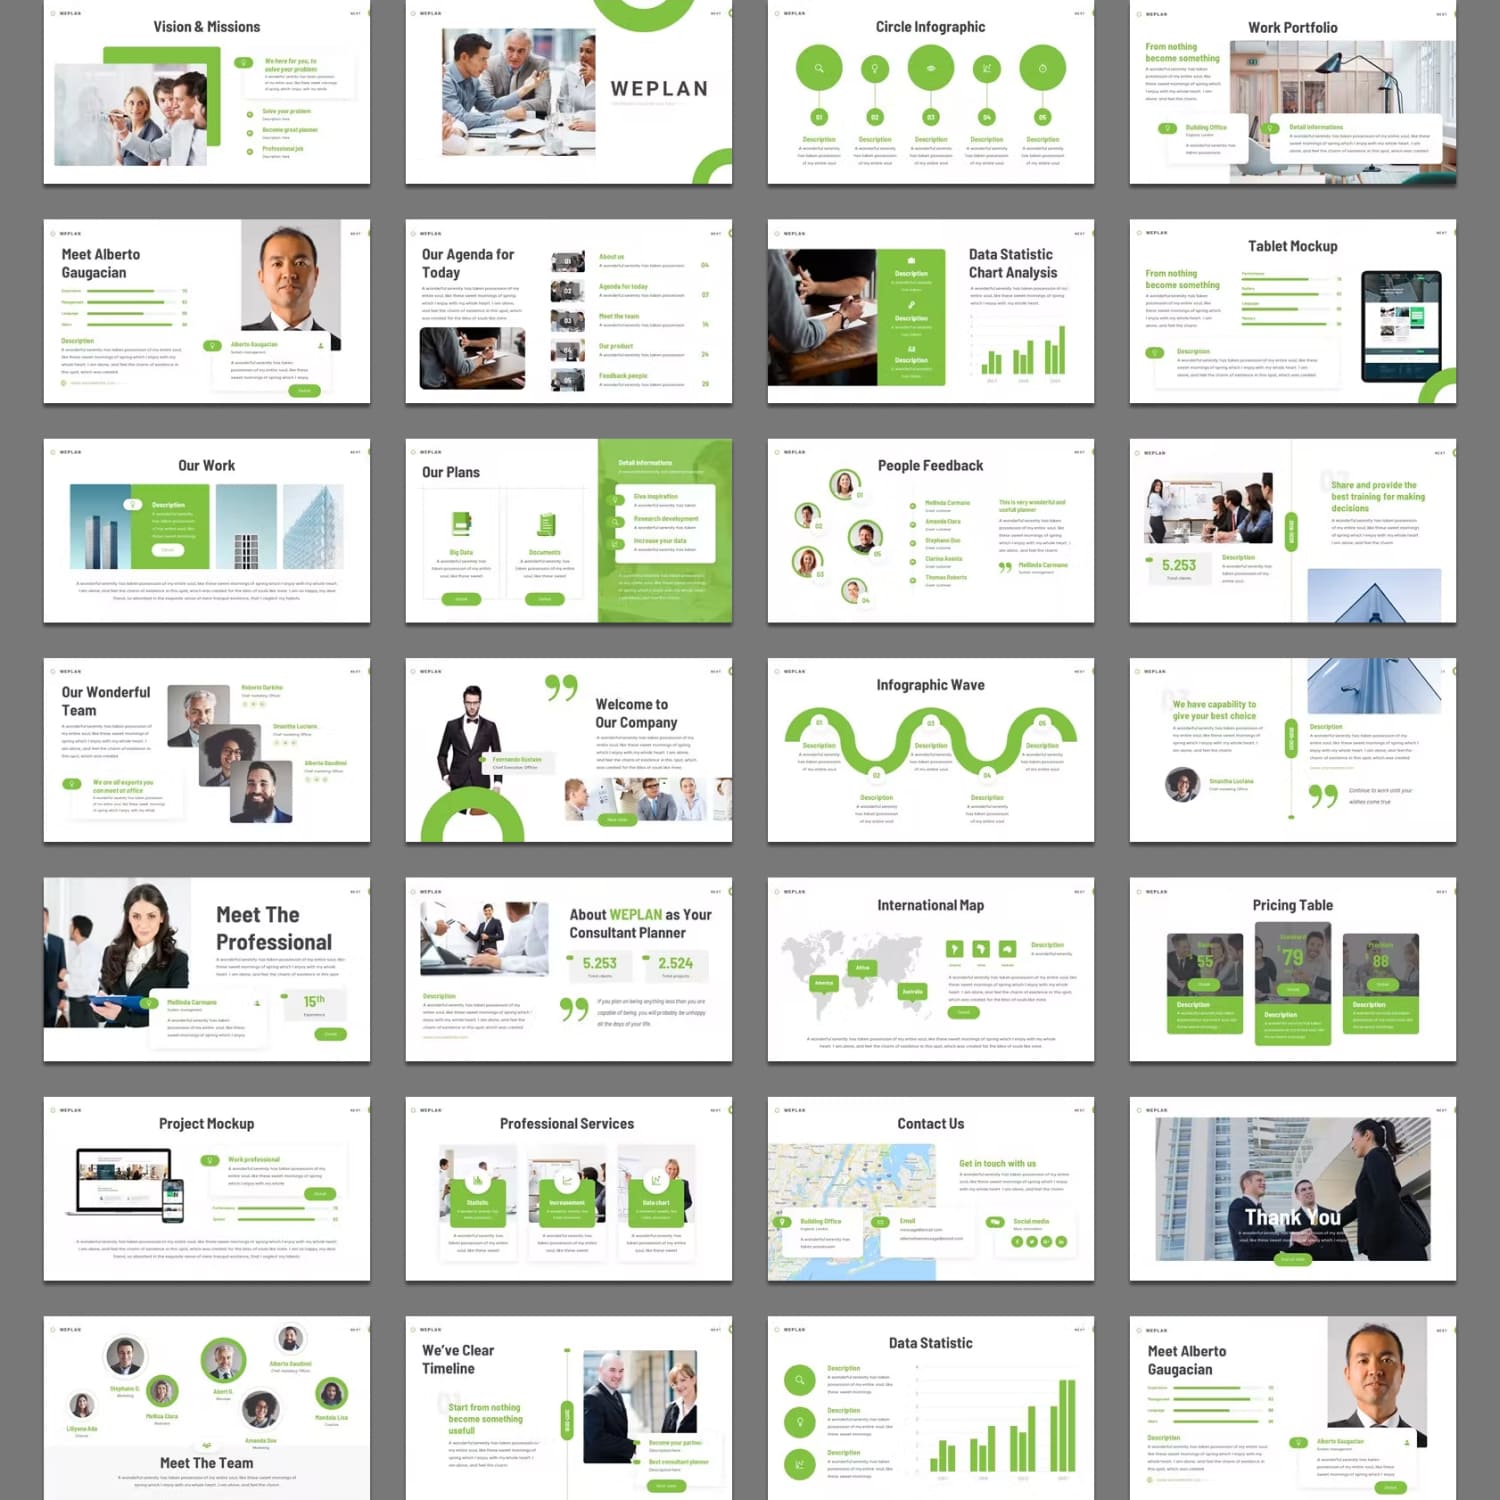 Weplan strategic planning powerpoint template from SlideFactory.